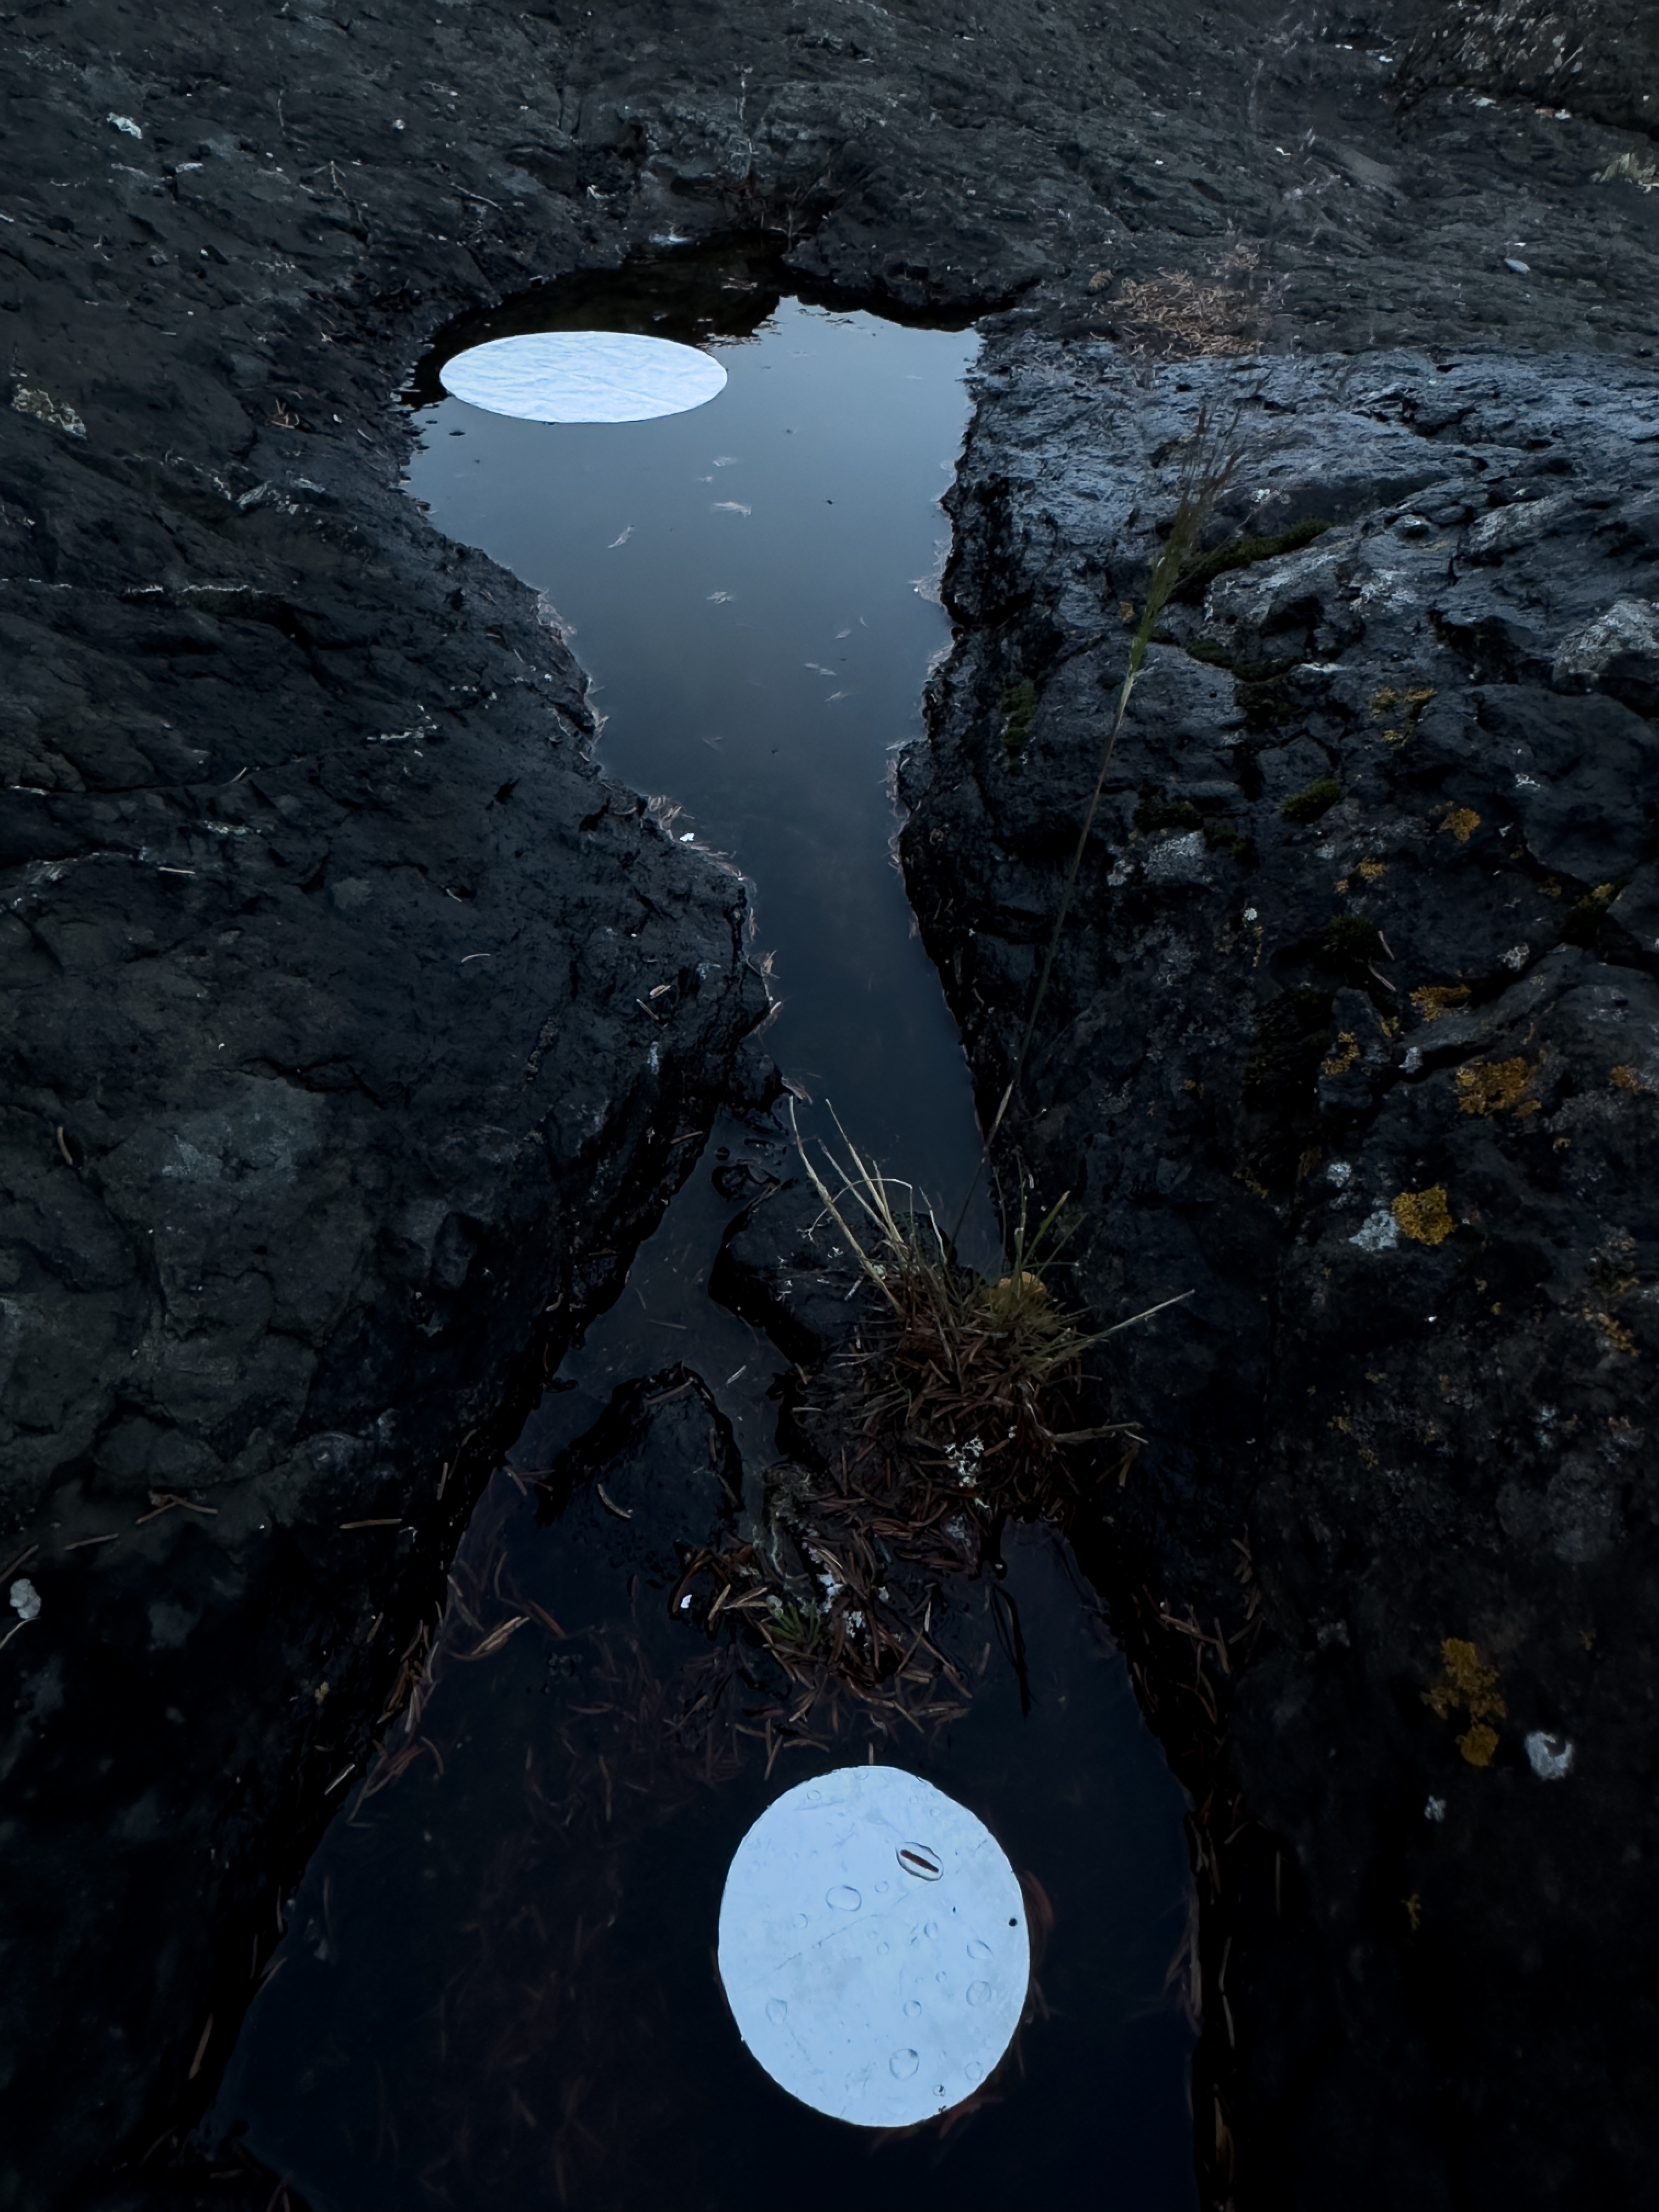 A small, still pool of water is surrounded by dark, jagged rocks. The smooth surface of the pool seems to reflect the sky, showing two bright, white circular shapes resembling moons or lights against the dark rock.